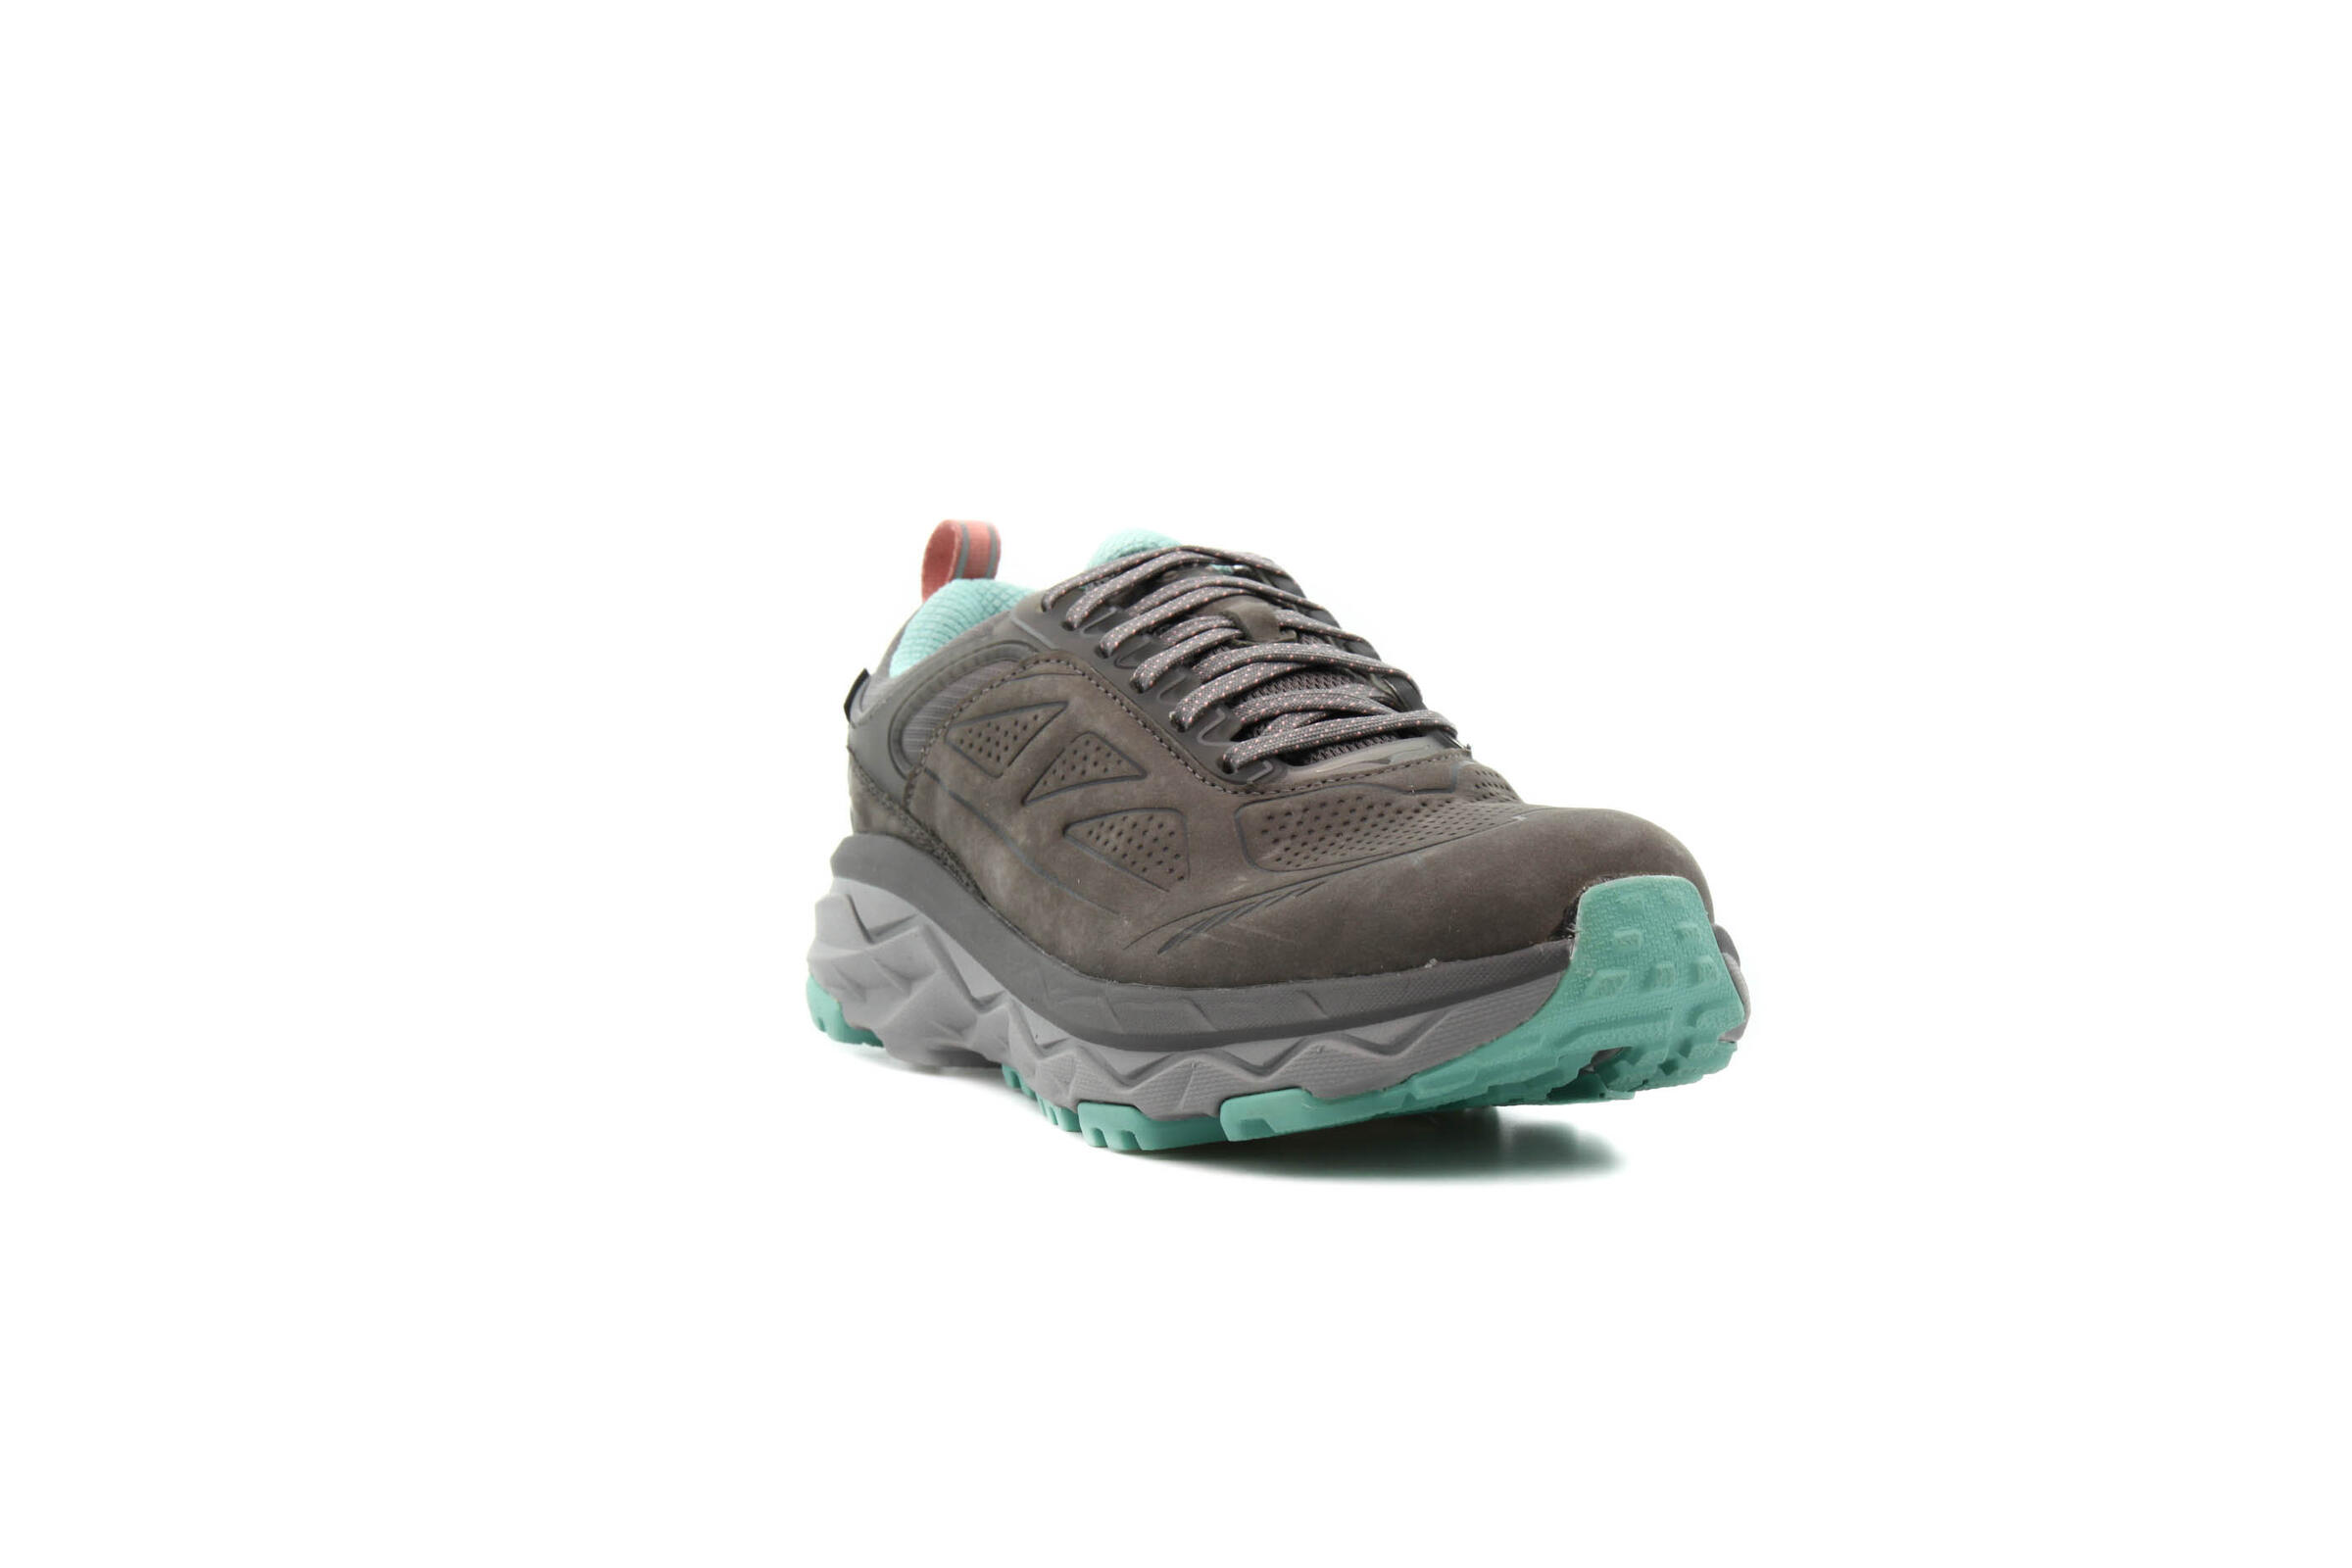 Hoka One One WMNS CHALLANGER LOW GORE-TEX "CHARCOAL GRAY"